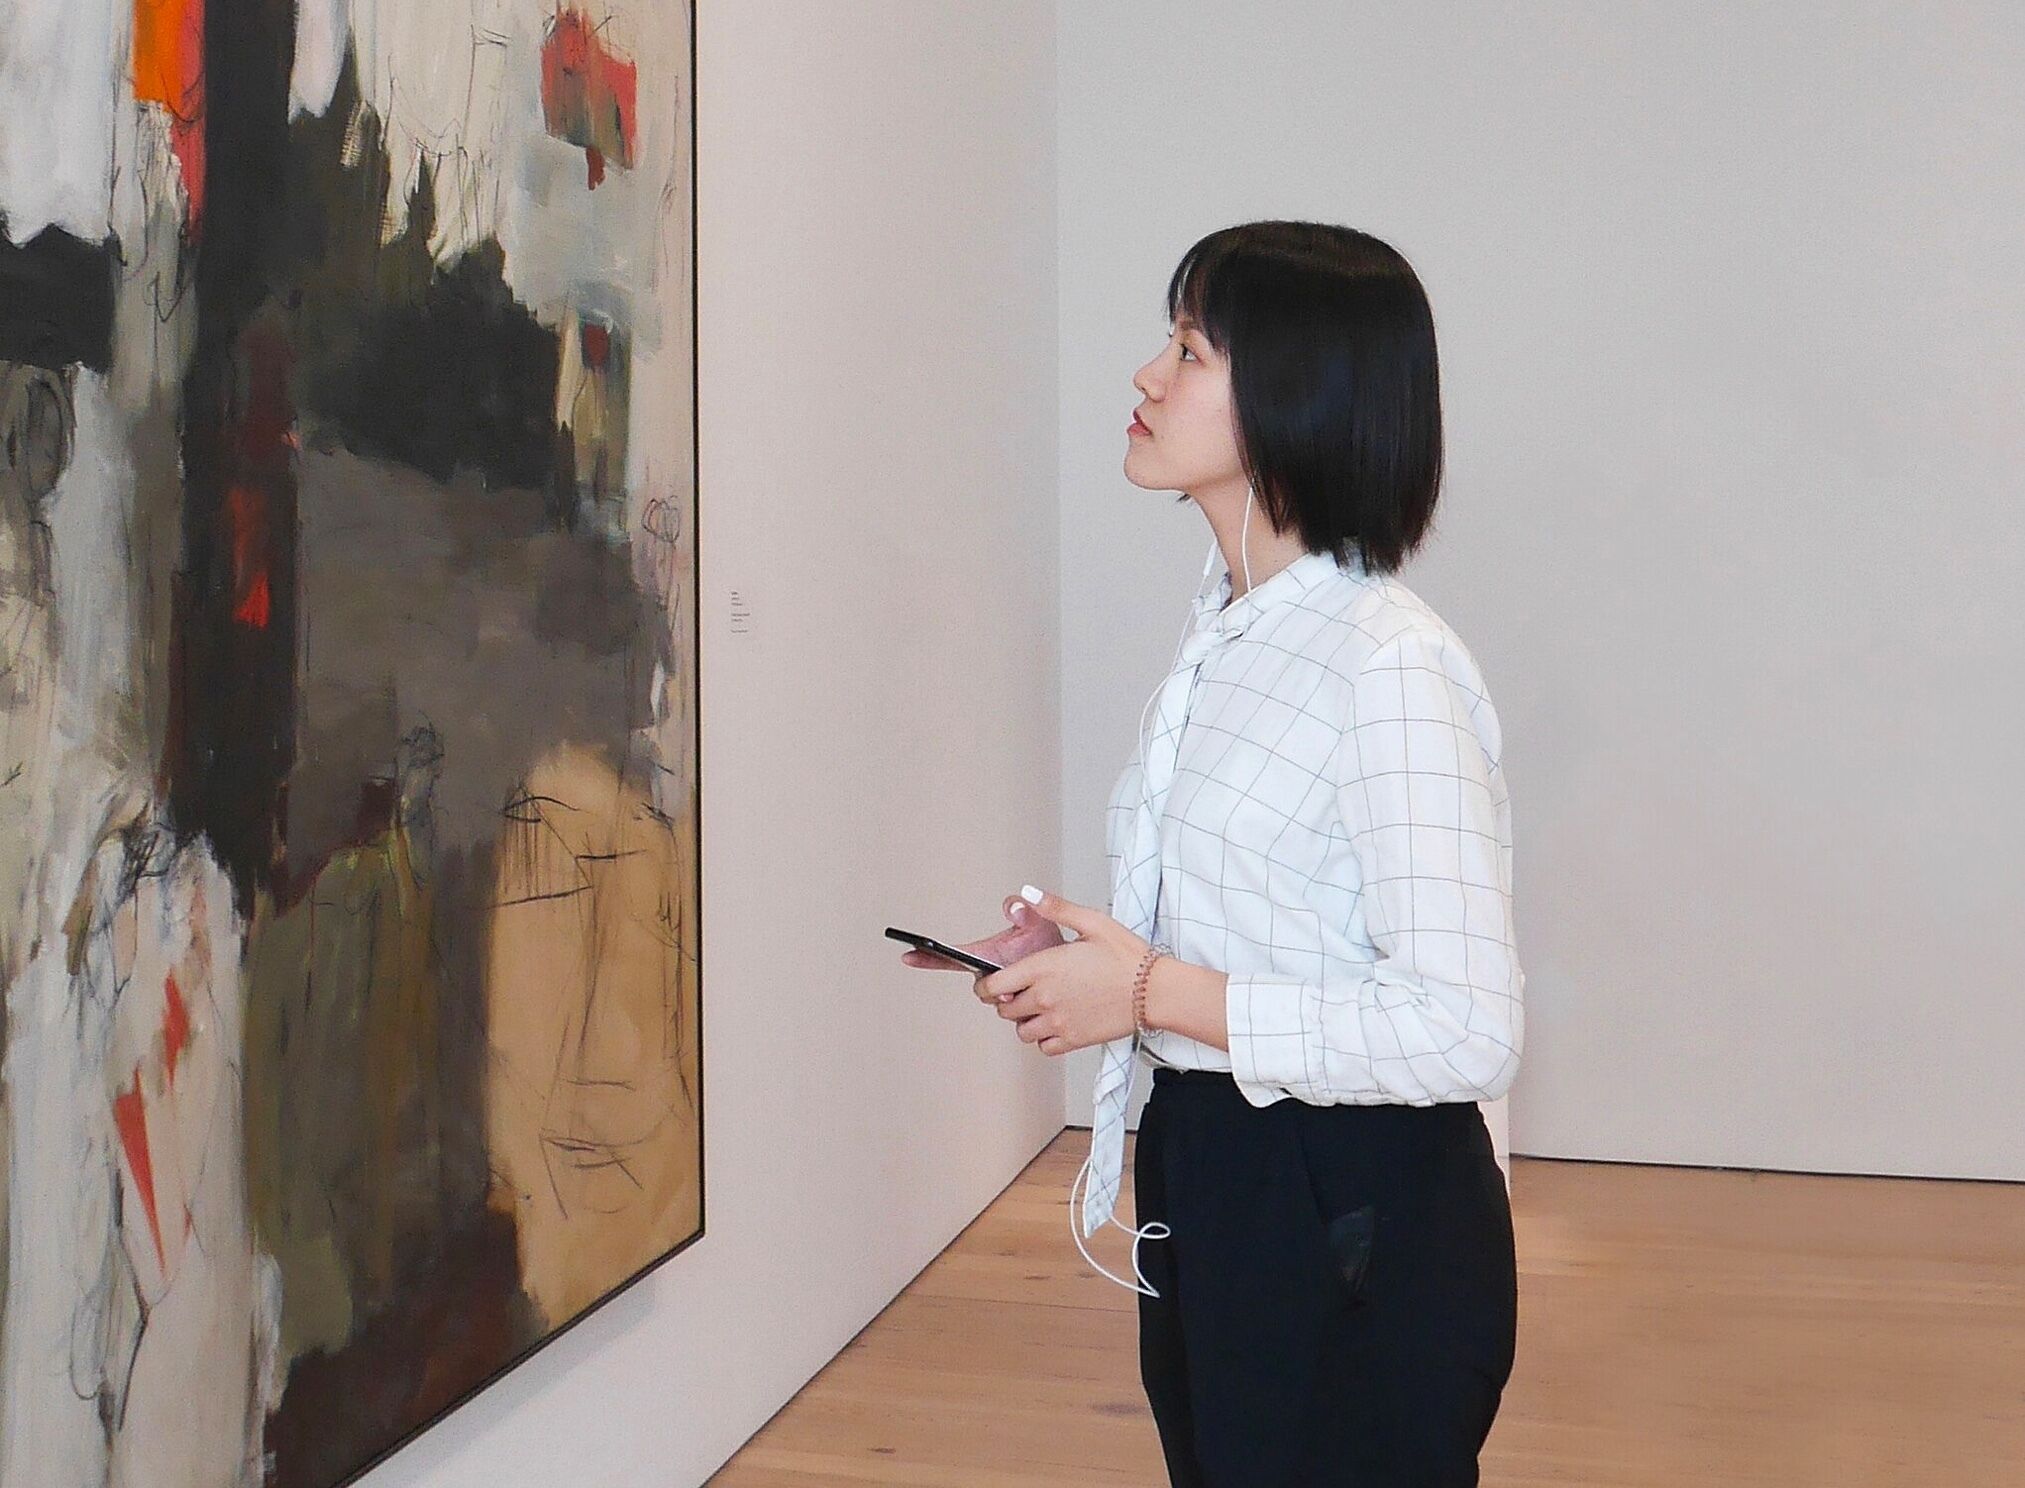 A woman viewing a work of art while wearing headphones and holding a smartphone.